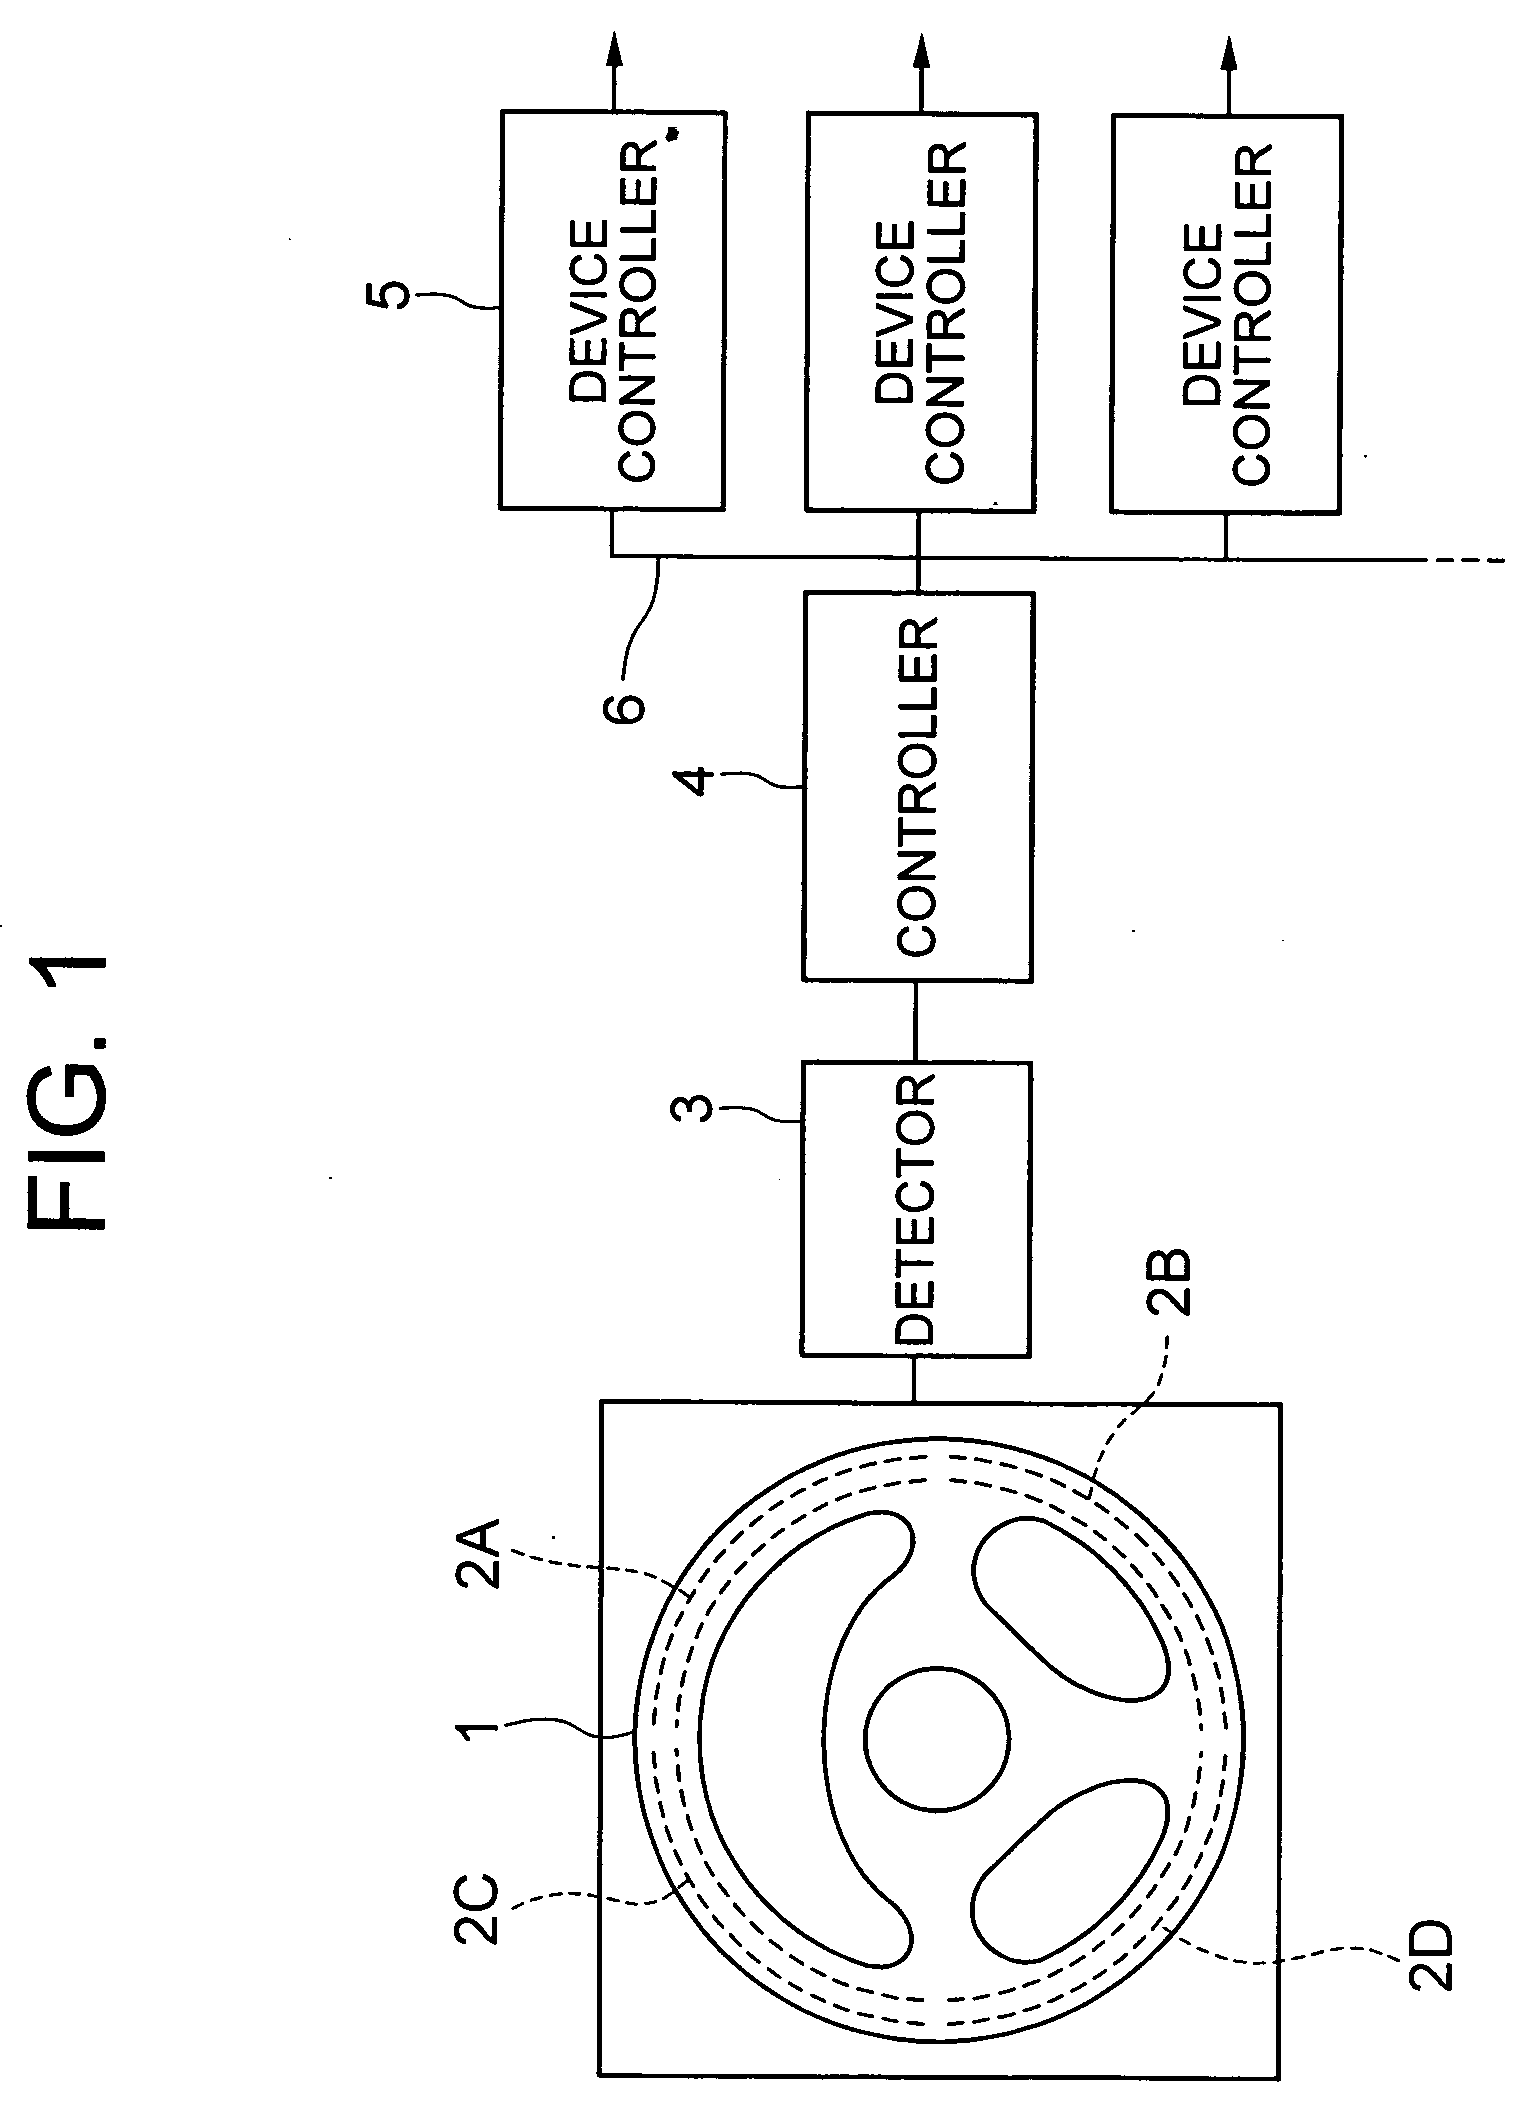 Operating device for on-vehicle equipment